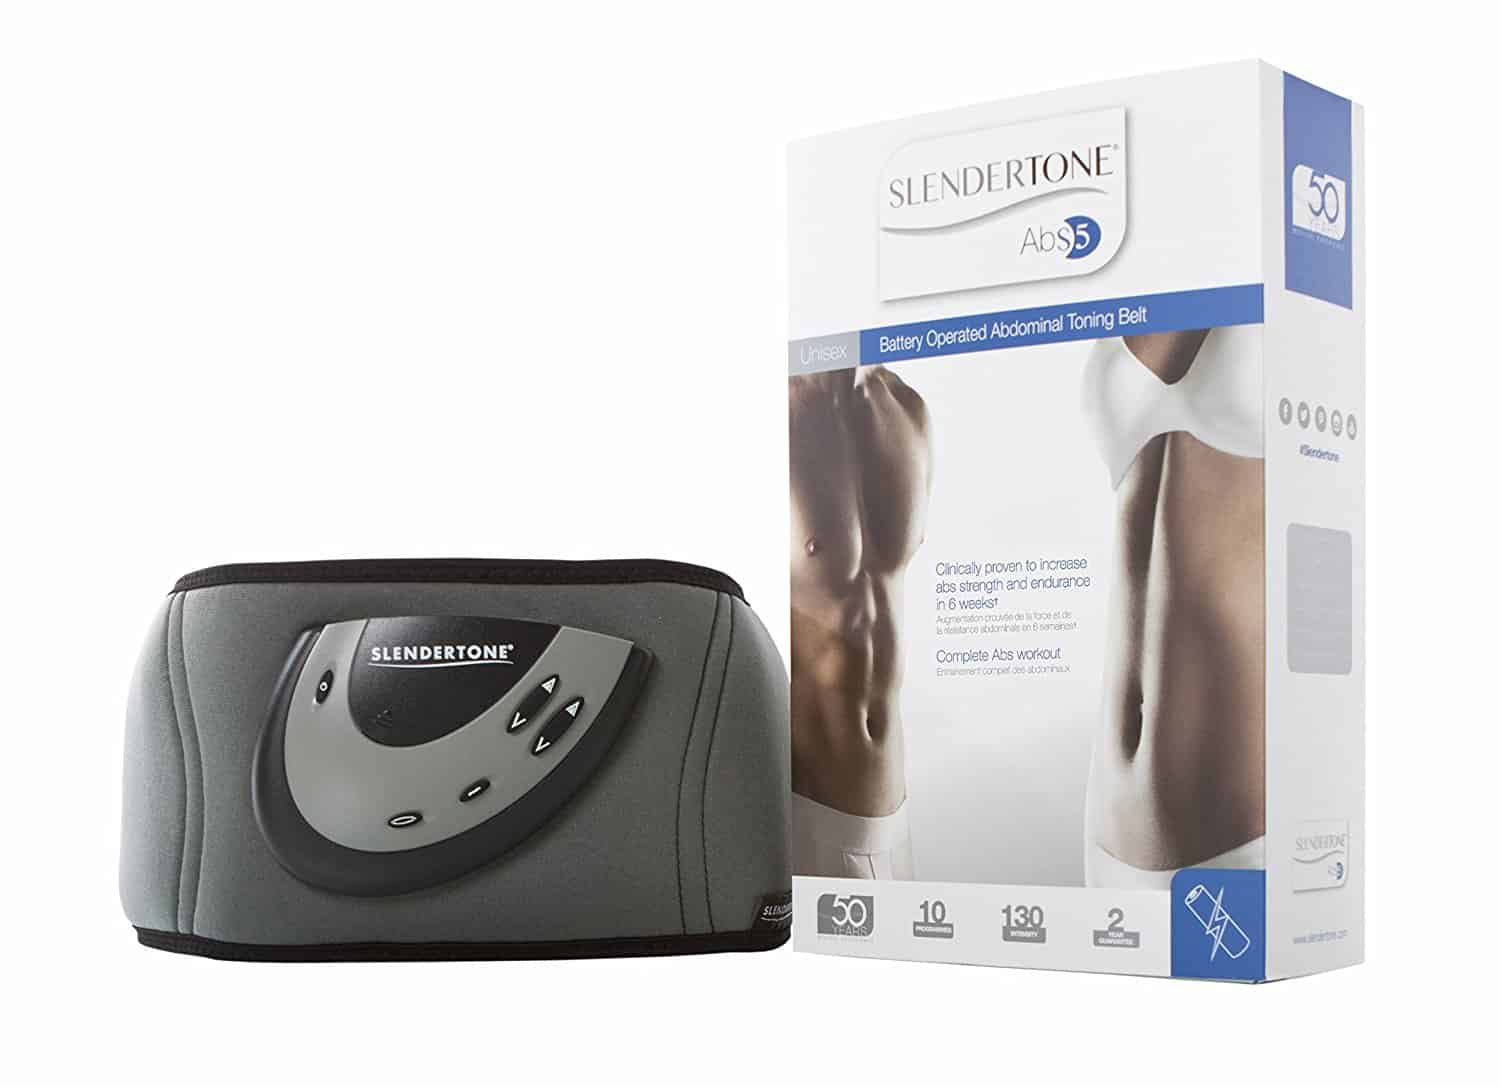 The slendertone belt: we test for you &#8211; Happiness and health